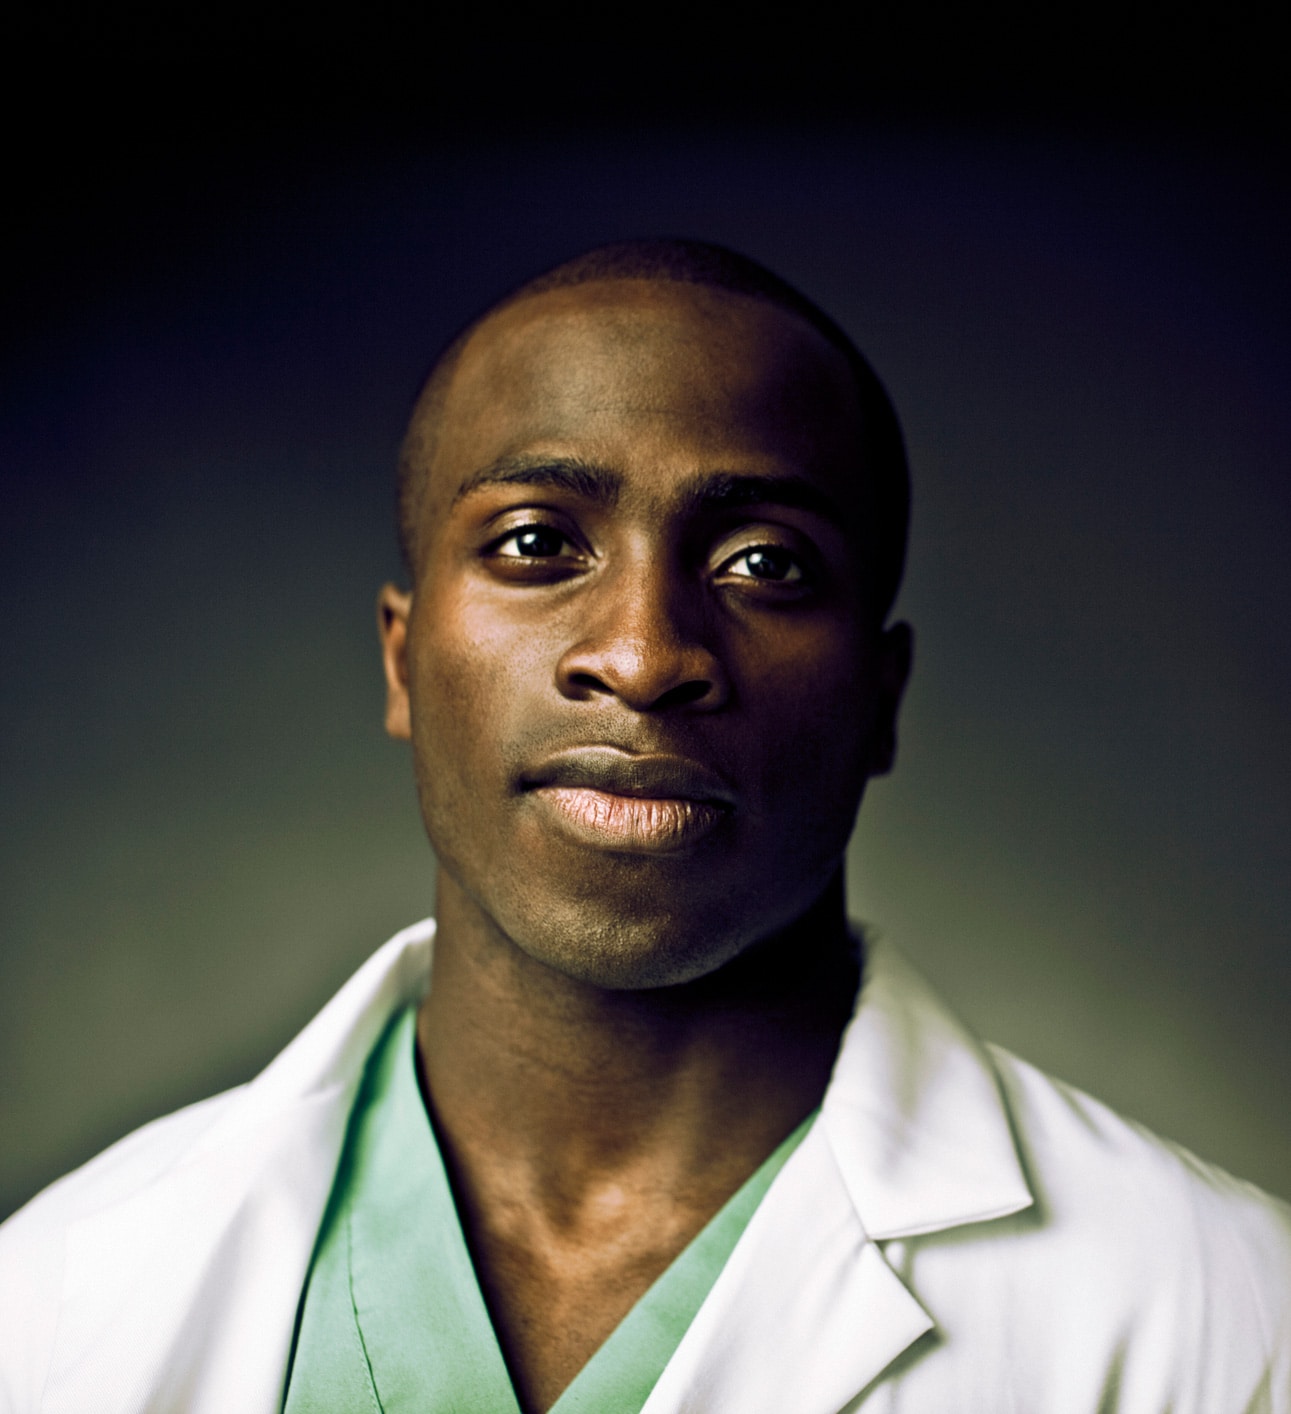 Photo of a Black doctor looking straight into the camera.